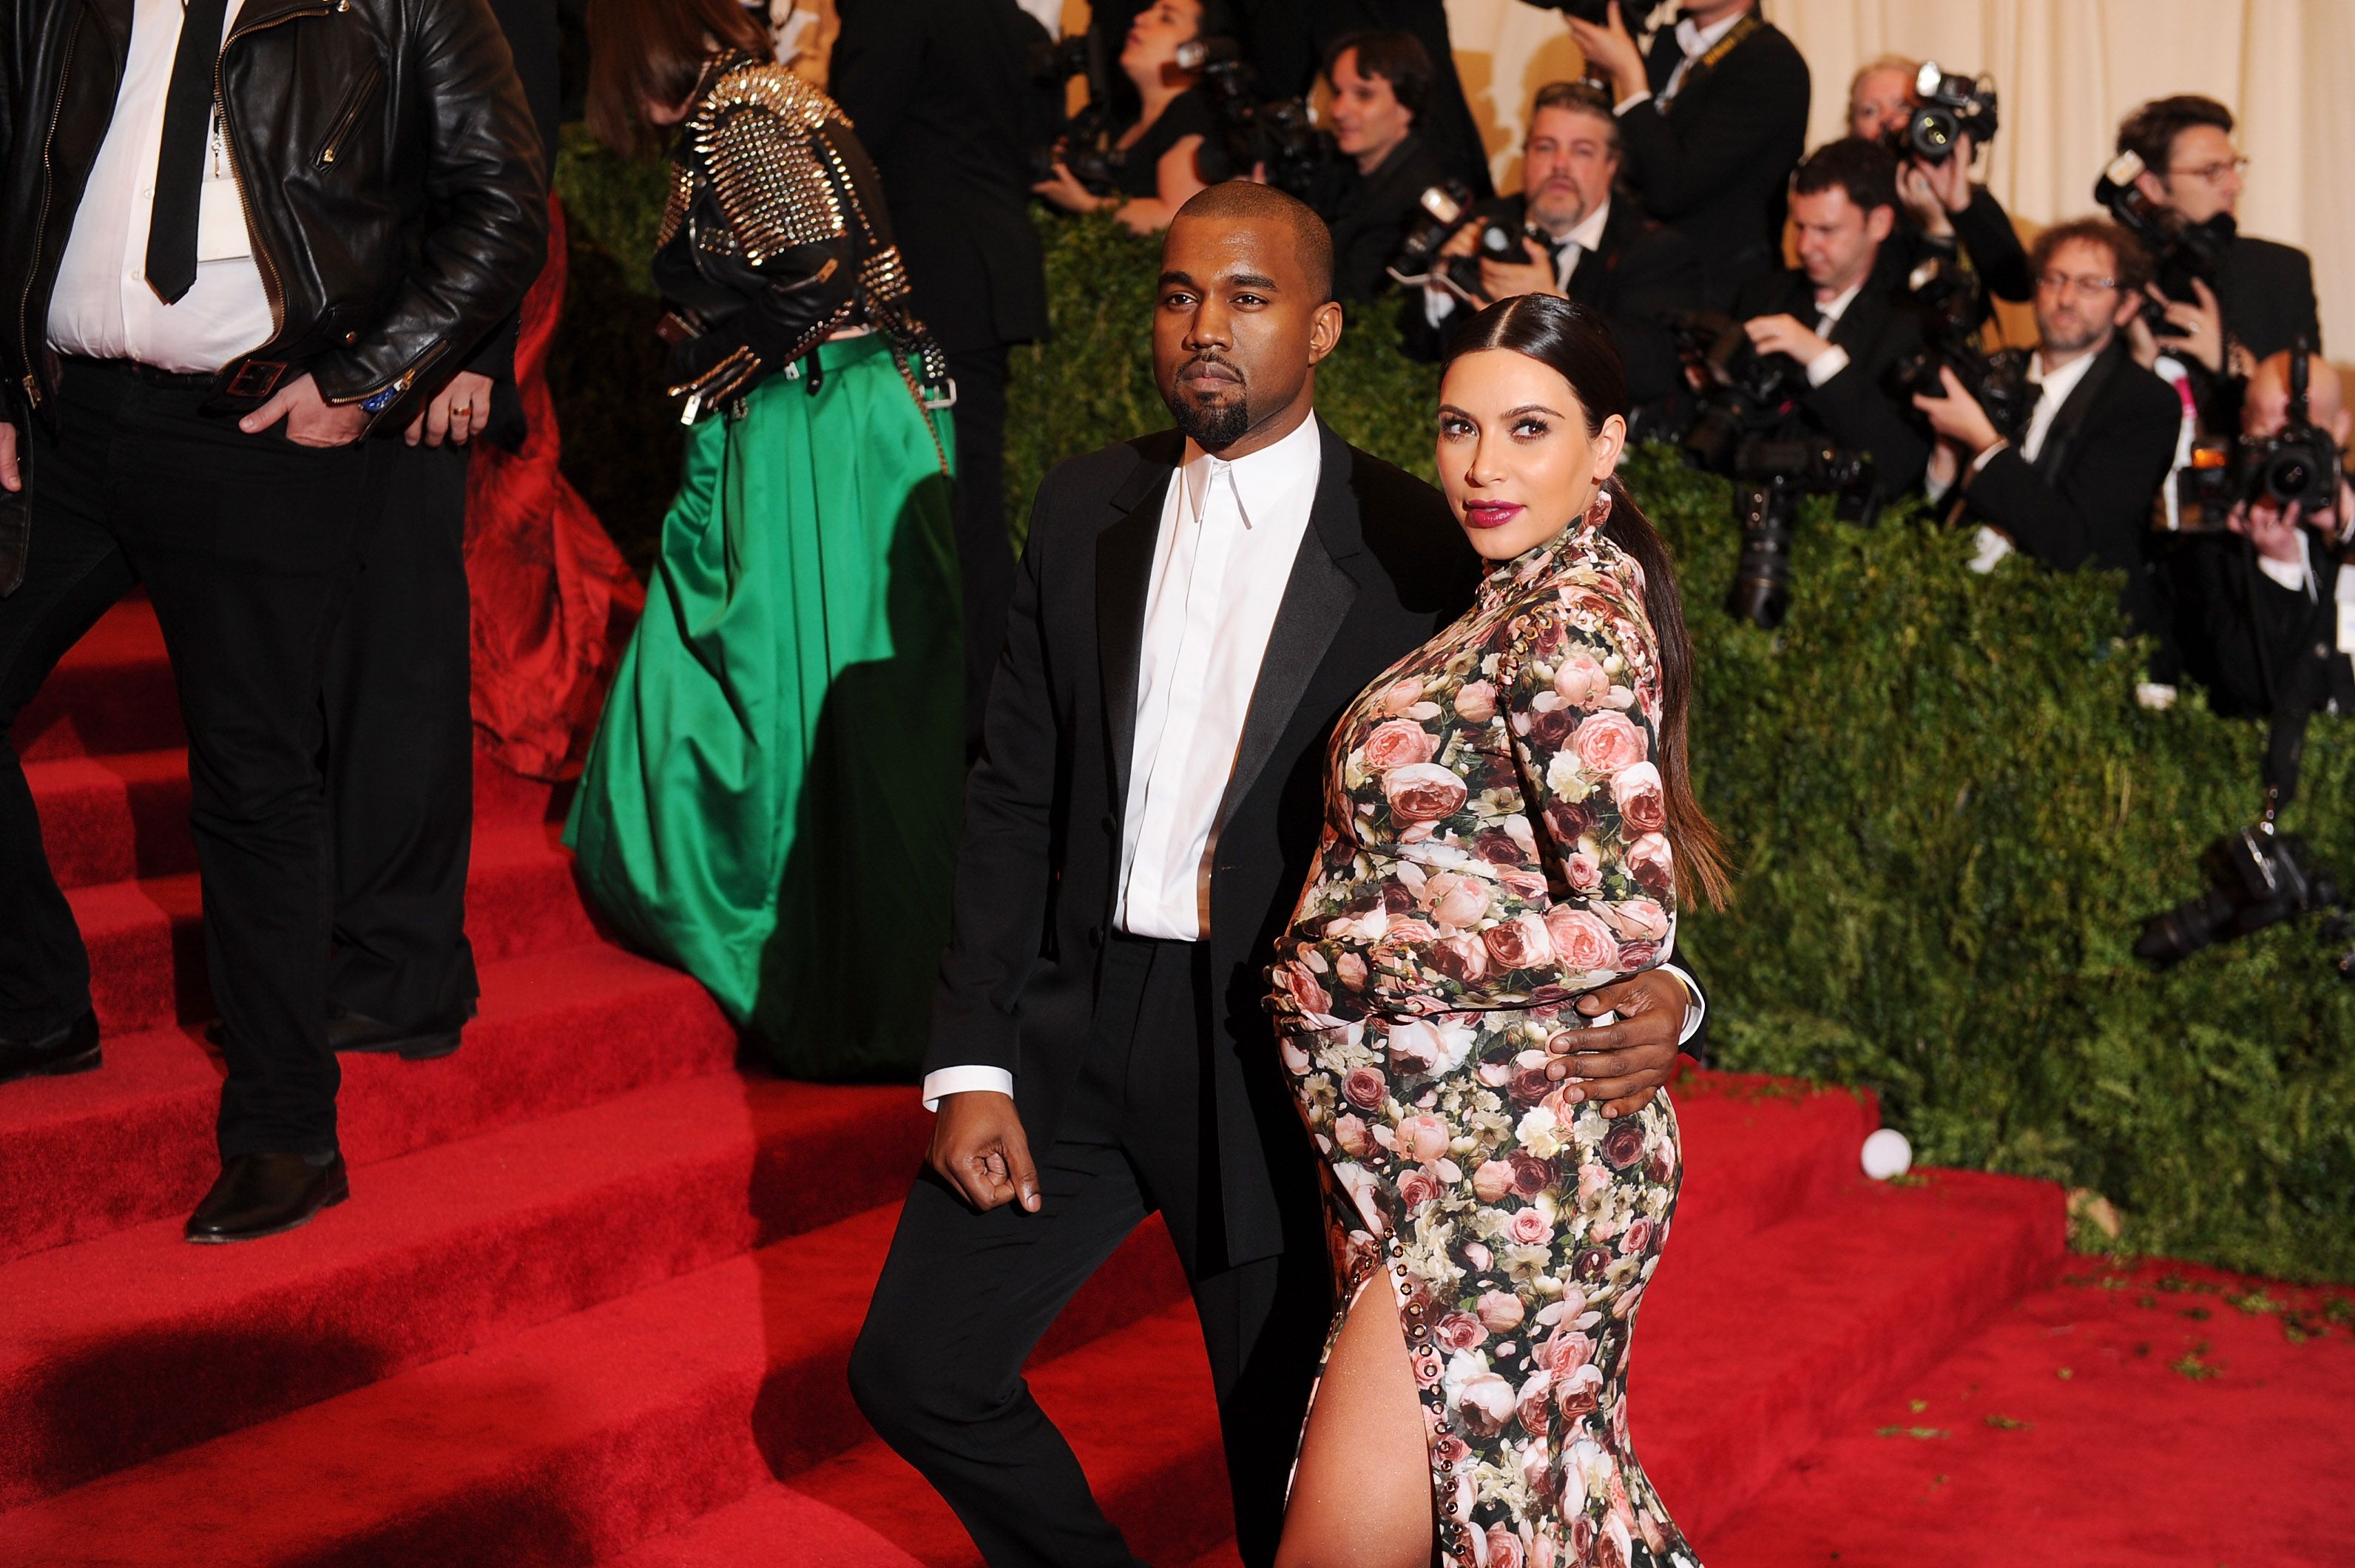 Kanye West and Kim Kardashian during the Costume Institute Gala for the "PUNK: Chaos to Couture" exhibition at the Metropolitan Museum of Art on May 6, 2013, in New York City. | Source: Getty Images